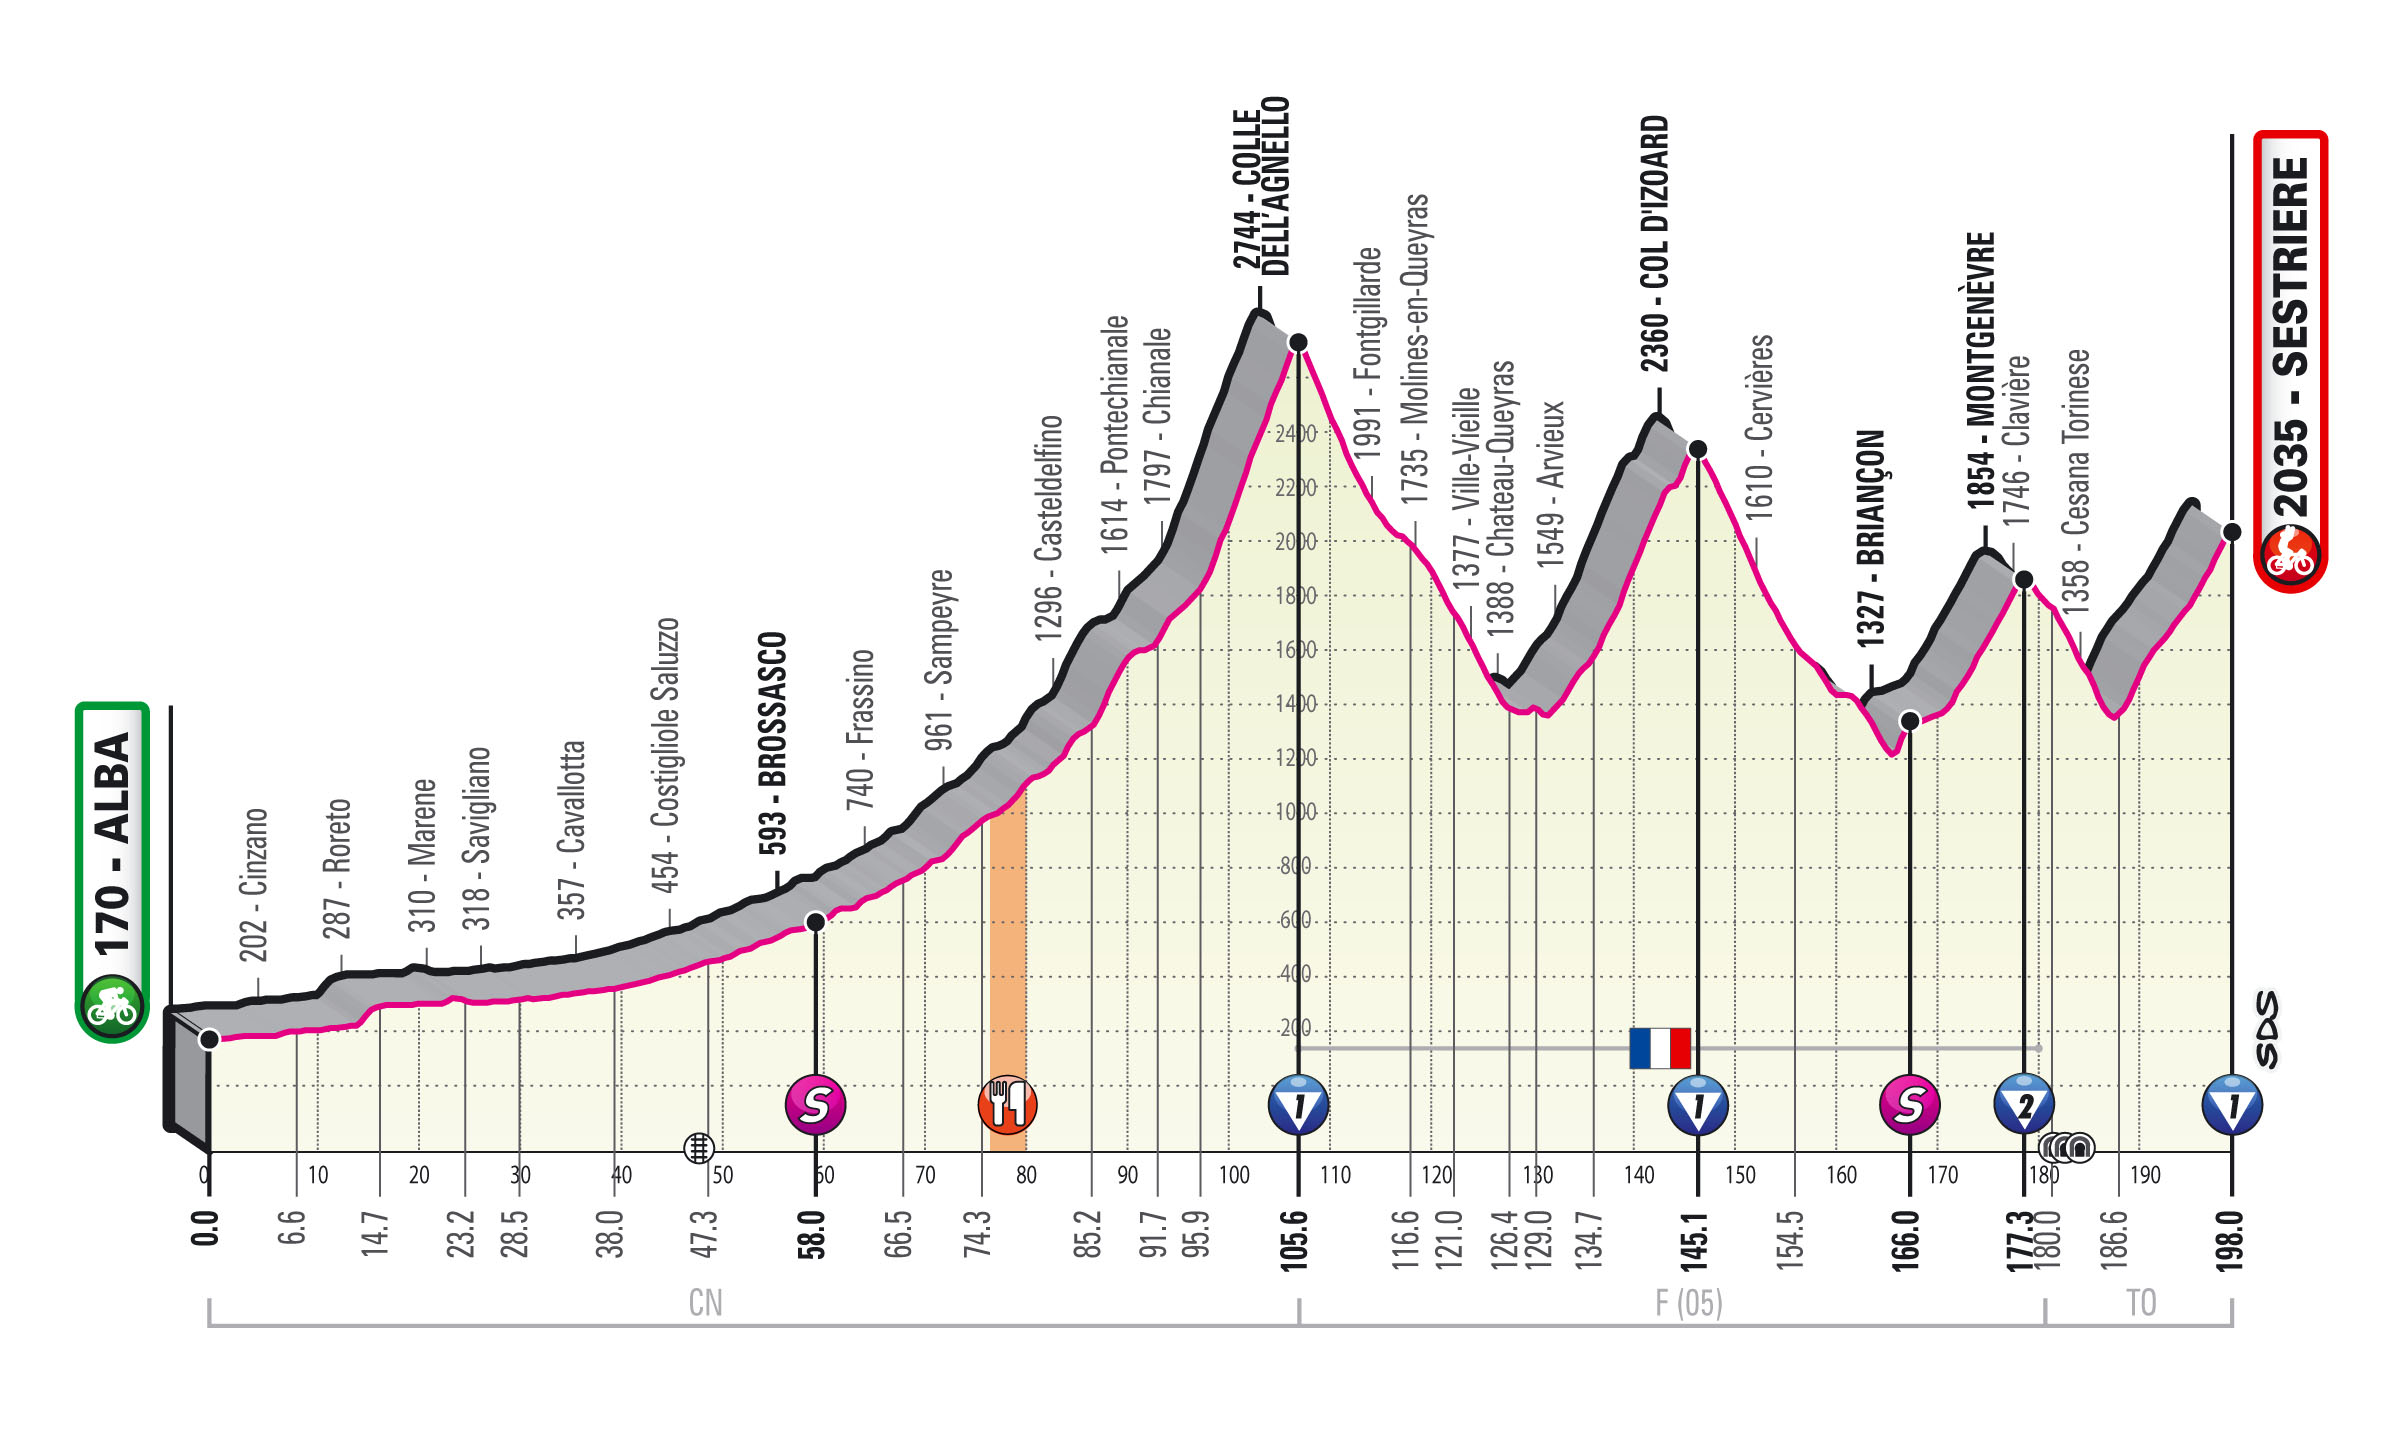 Revised 2020 Giro d'Italia route features additional summit finish at